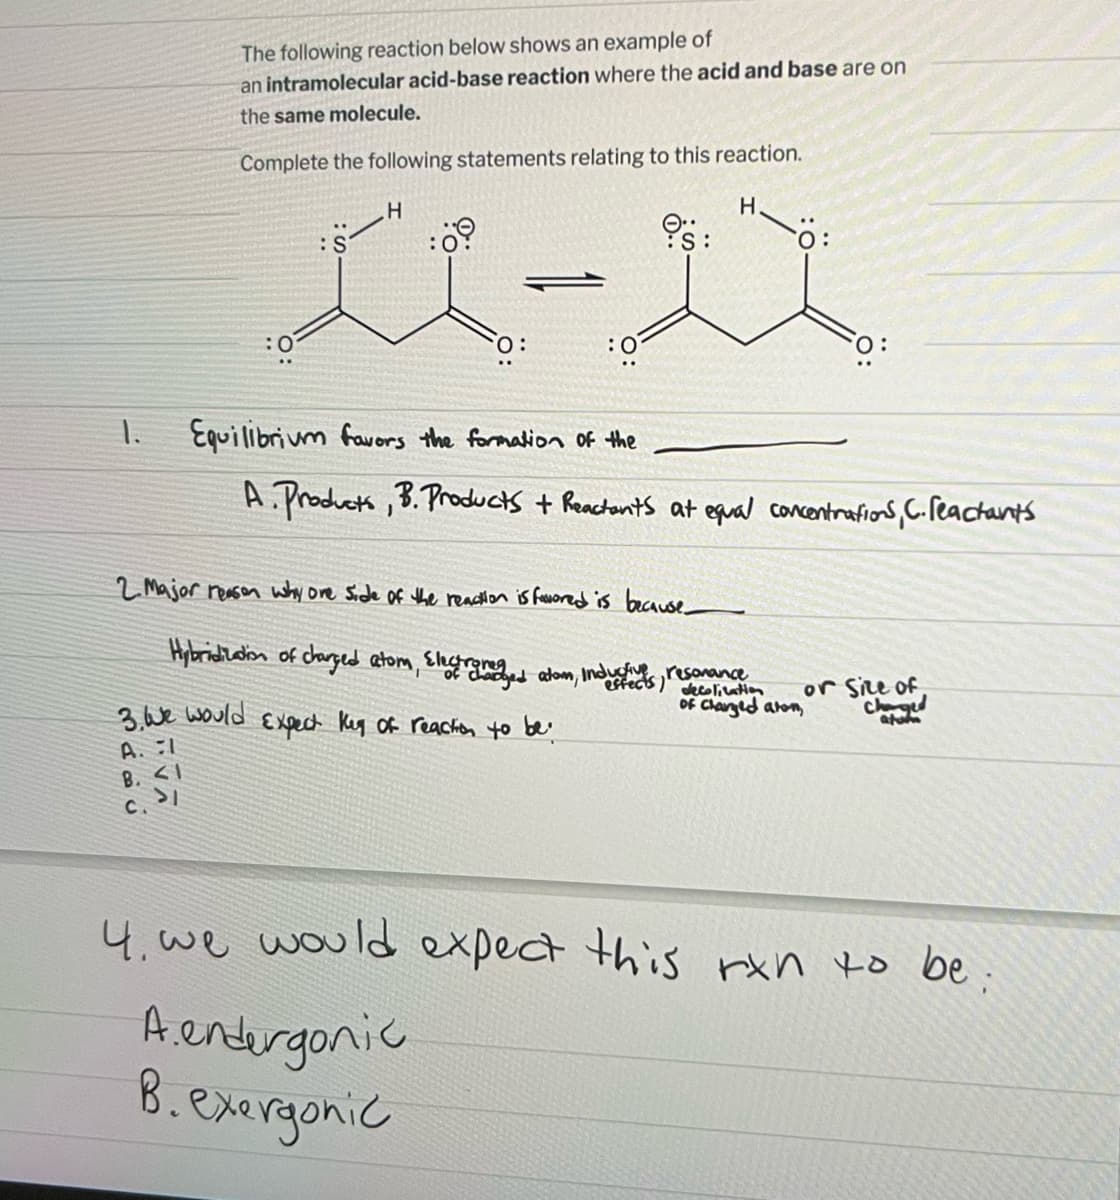 The following reaction below shows an example of
an intramolecular acid-base reaction where the acid and base are on
the same molecule.
Complete the following statements relating to this reaction.
H
H.
:0
:S
3. We would
A. I
B. <1
c. 31
:0⁹
0:
Equilibrium favors the formation of the
A. Products, B. Products + Reactants at equal concentrations, C. reactant's
2.Major reason why one side of the reaction is favored is because_
Hybridization of charged atom, Electromedaged atom, induced as
Expect Key of reaction to be
resonance
decolication
of charged alon,
or Size of
Charged
atom
4. we would expect this rxn to be;
A.endergonic
B. exergonic